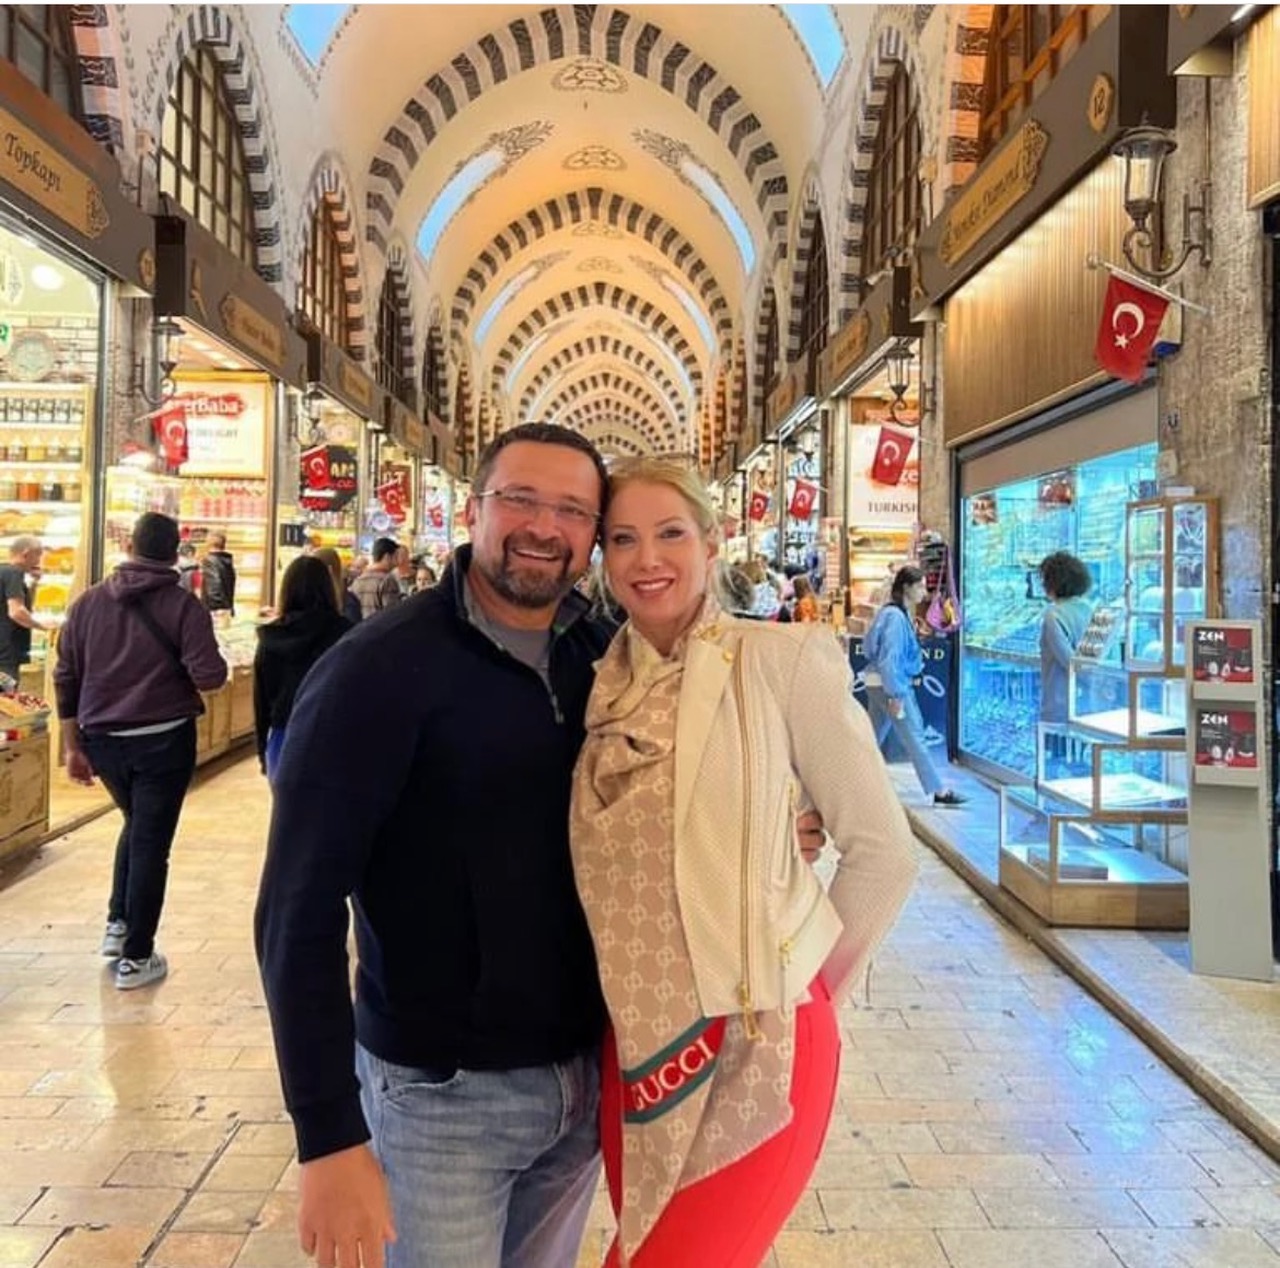 Surgeon Bora Kosti and his wife Giovanna, after the Plastic Surgery Congress in Turkey, on a romantic tour of the luxurious Istanbul